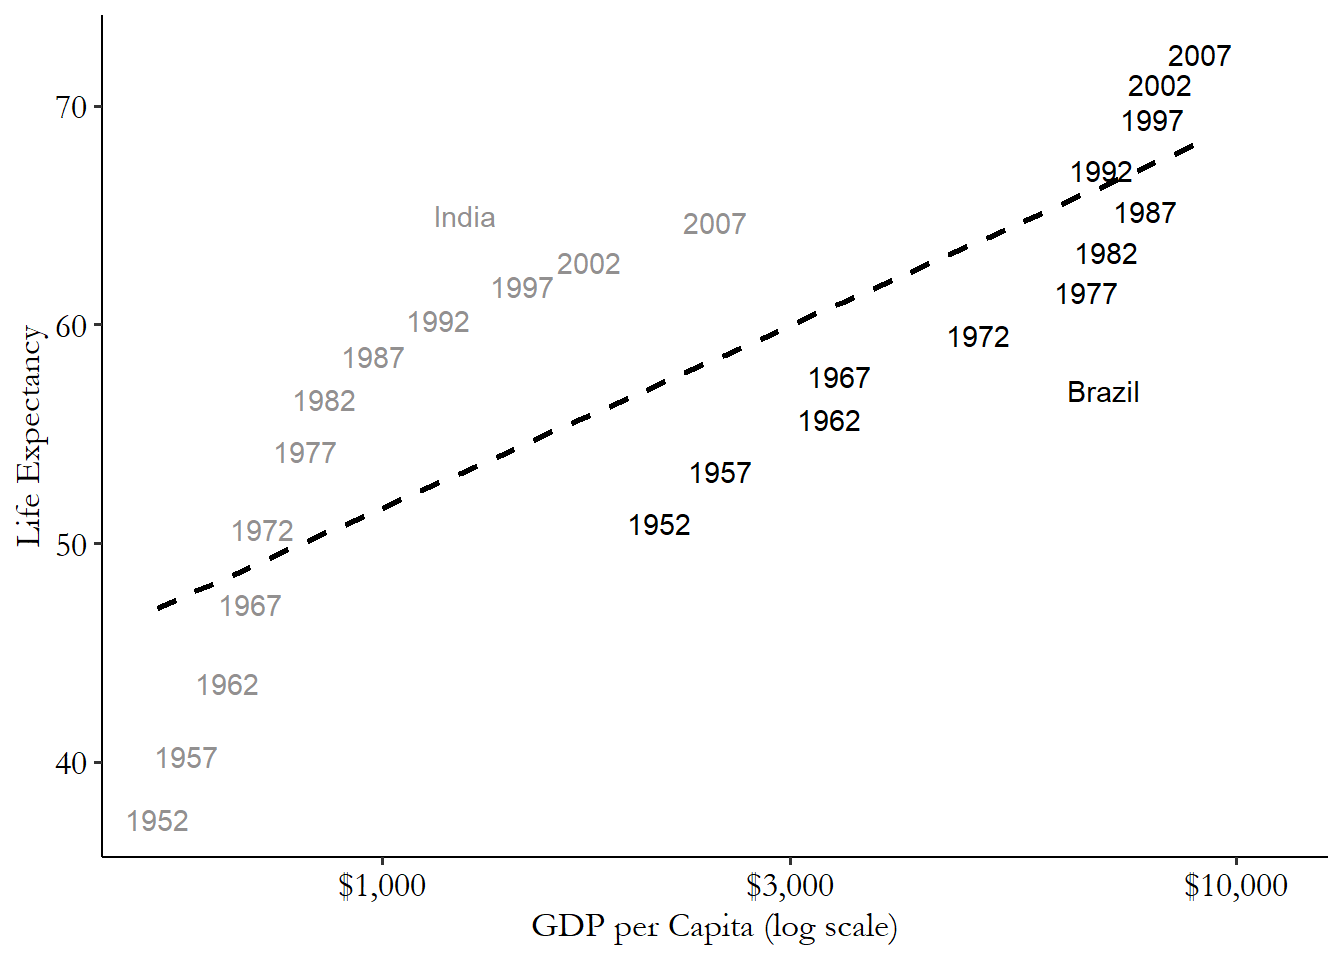 Graph showing life expectancy and GDP per capita for Brazil and India over time. They look like, within country, they have similar slopes, but are in different places on the graph.